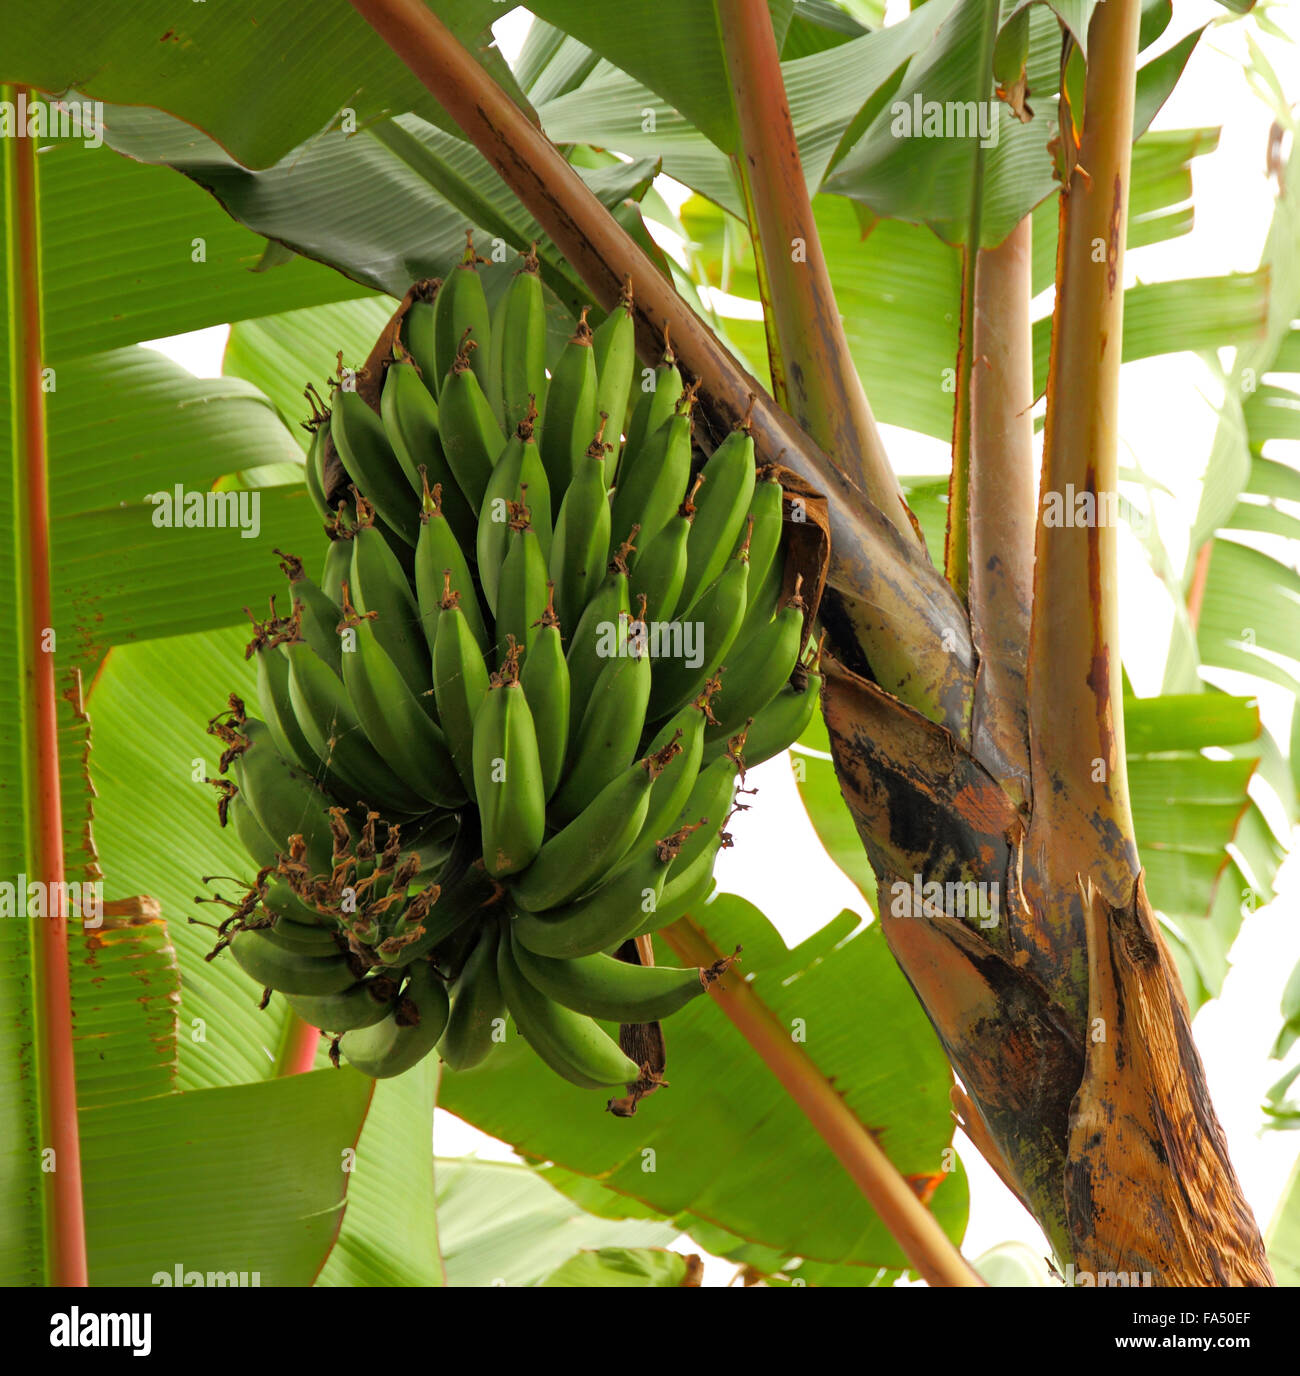 https://c8.alamy.com/comp/FA50EF/a-large-group-of-bananas-hanging-in-a-a-banana-tree-FA50EF.jpg